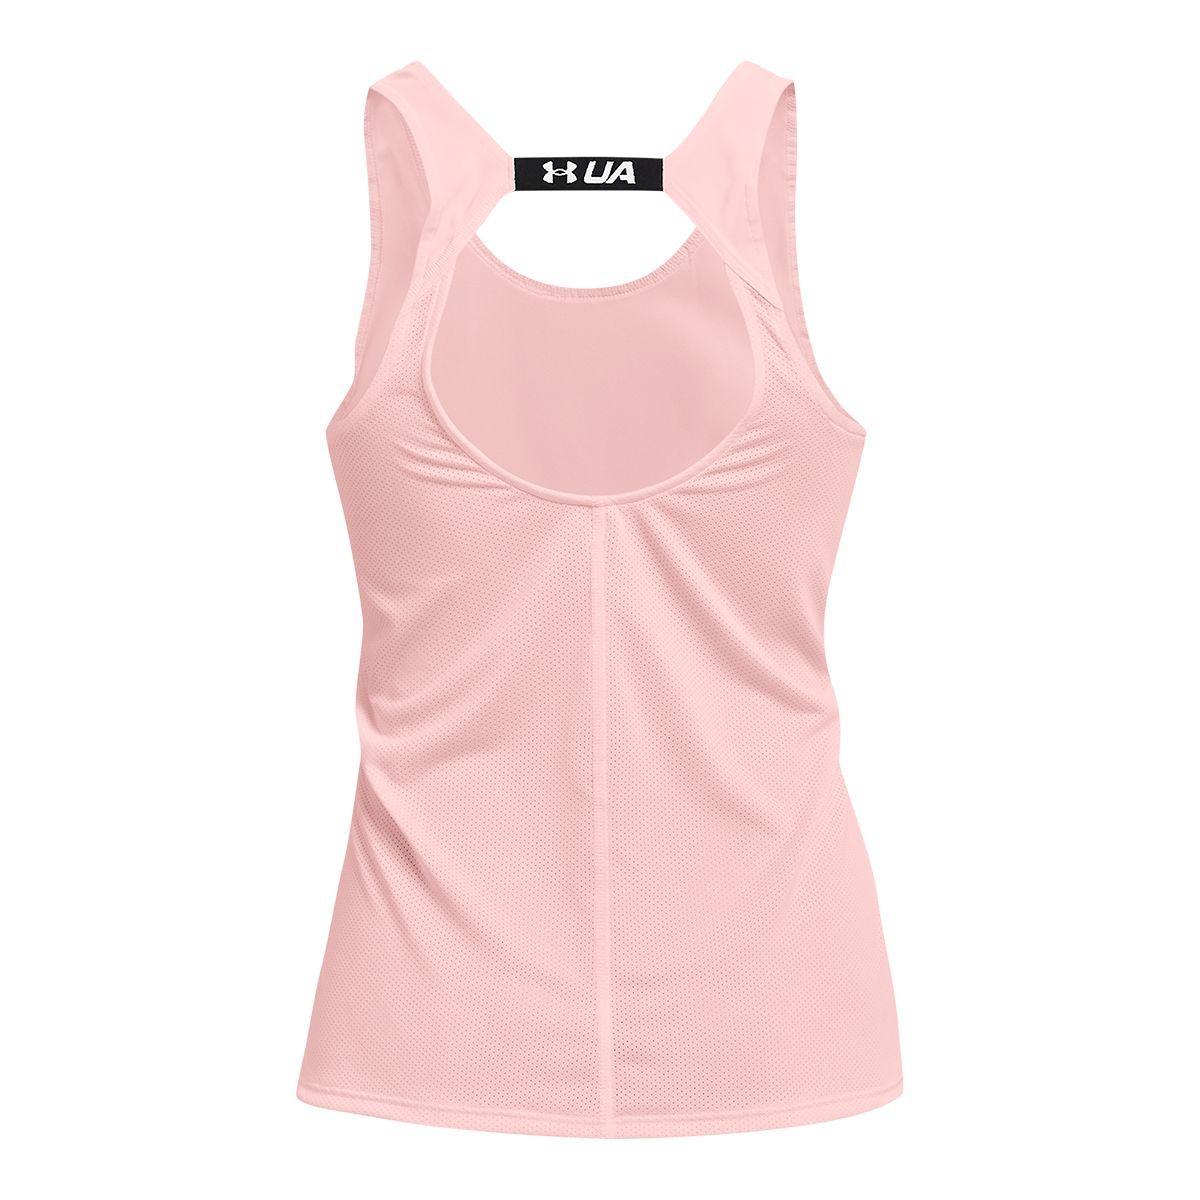 Under Armour - Womens Tank Top, Color Black (001), Size: XX-Large